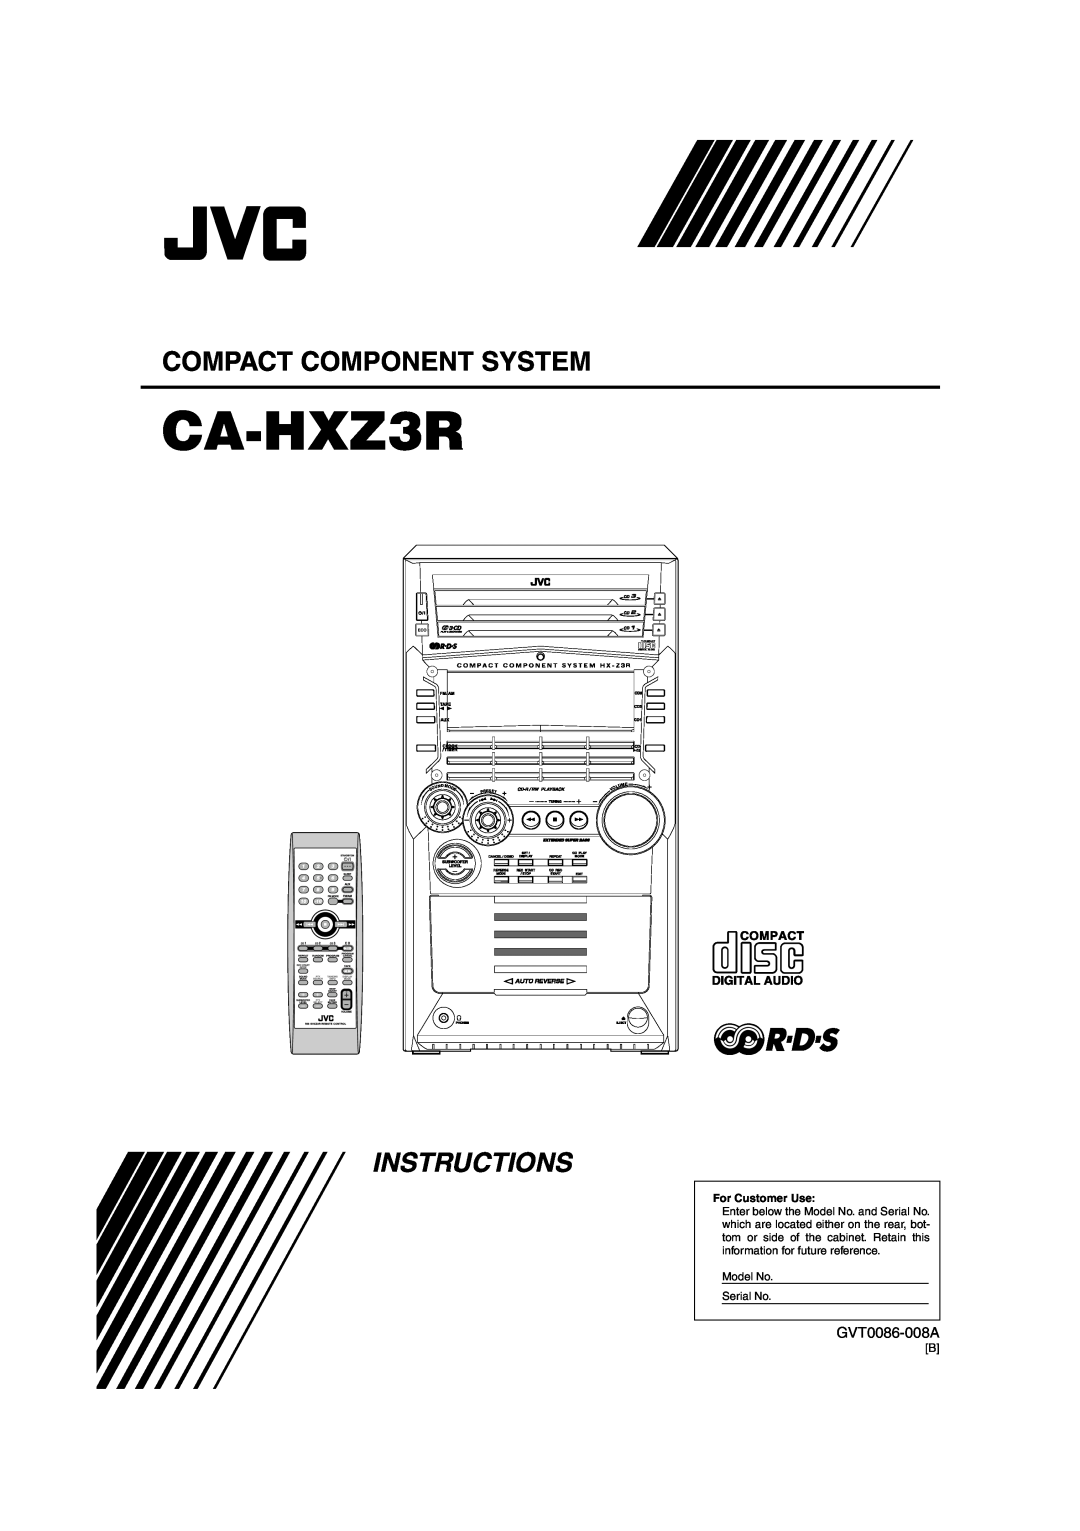 JVC CA-HXZ3R manual Compact Component System, Instructions, For Customer Use, Olume, Eset, Compact Digital Audio 